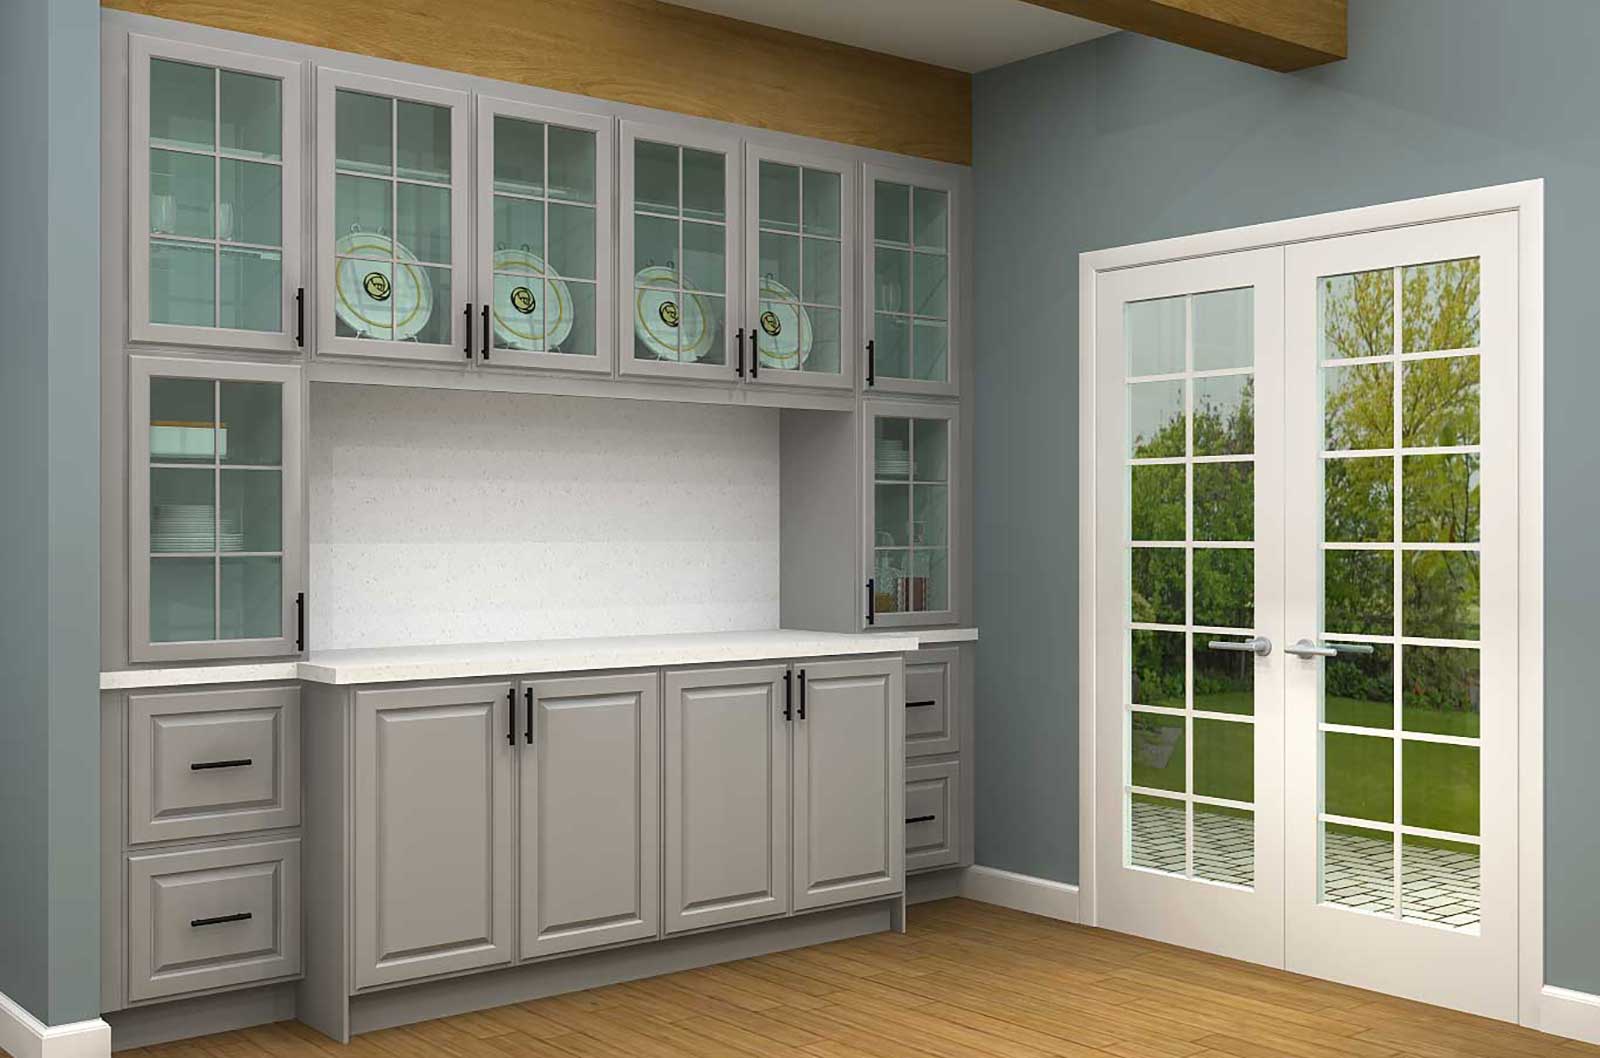 Built-ins: Customizing Your Home with IKEA Cabinets